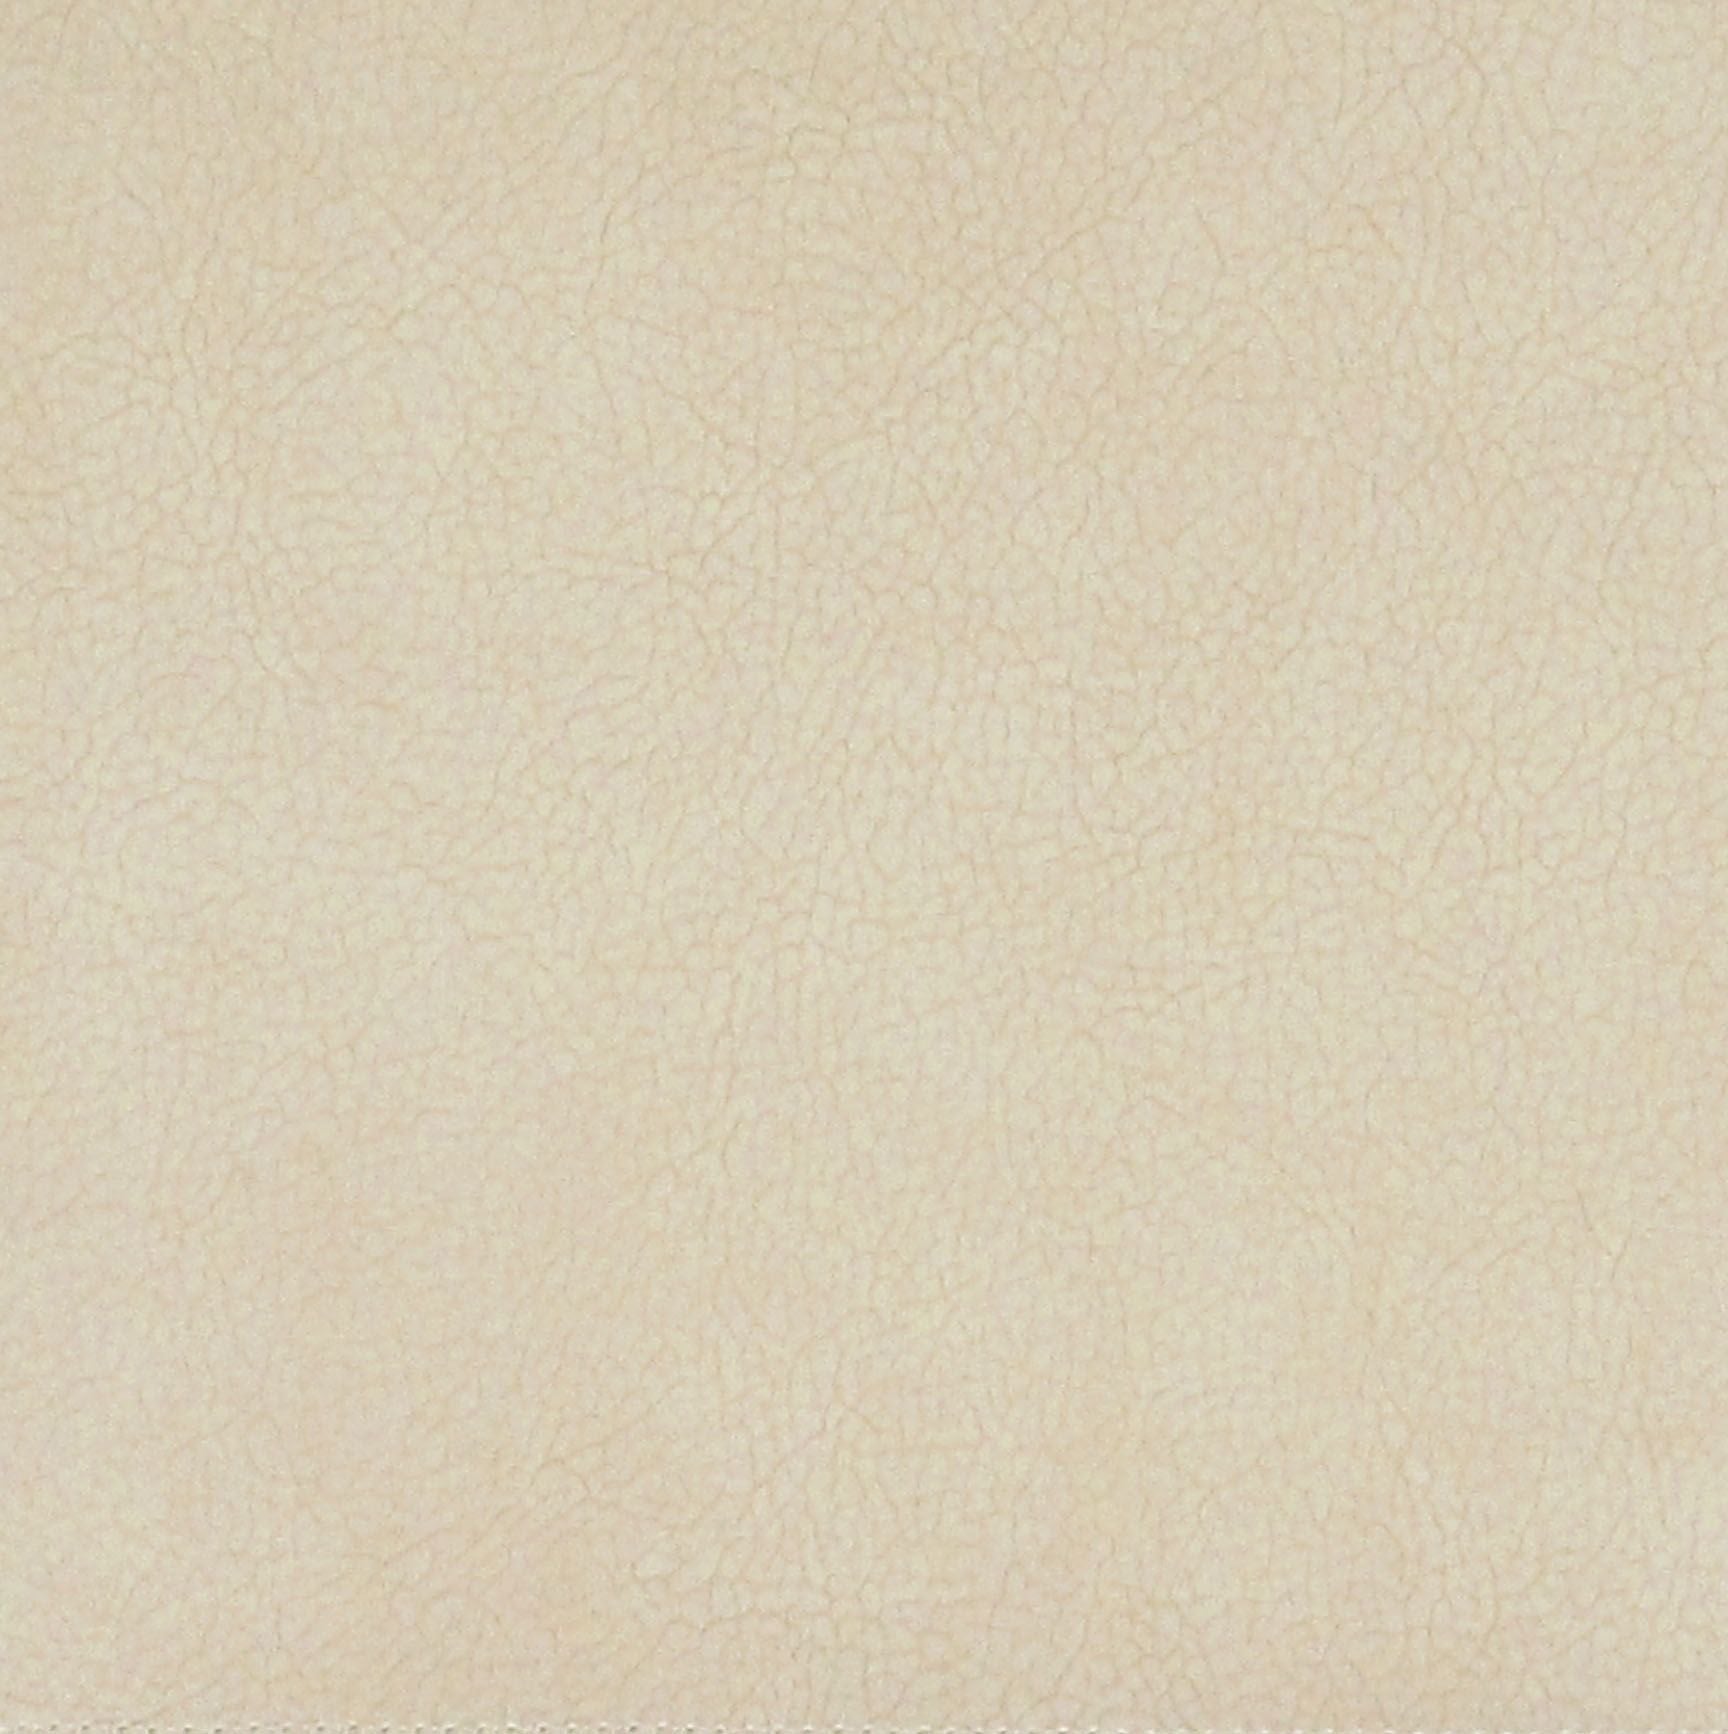 Georgia Suede fabric in macadamia color - pattern number H6 37435937 - by Scalamandre in the Old World Weavers collection